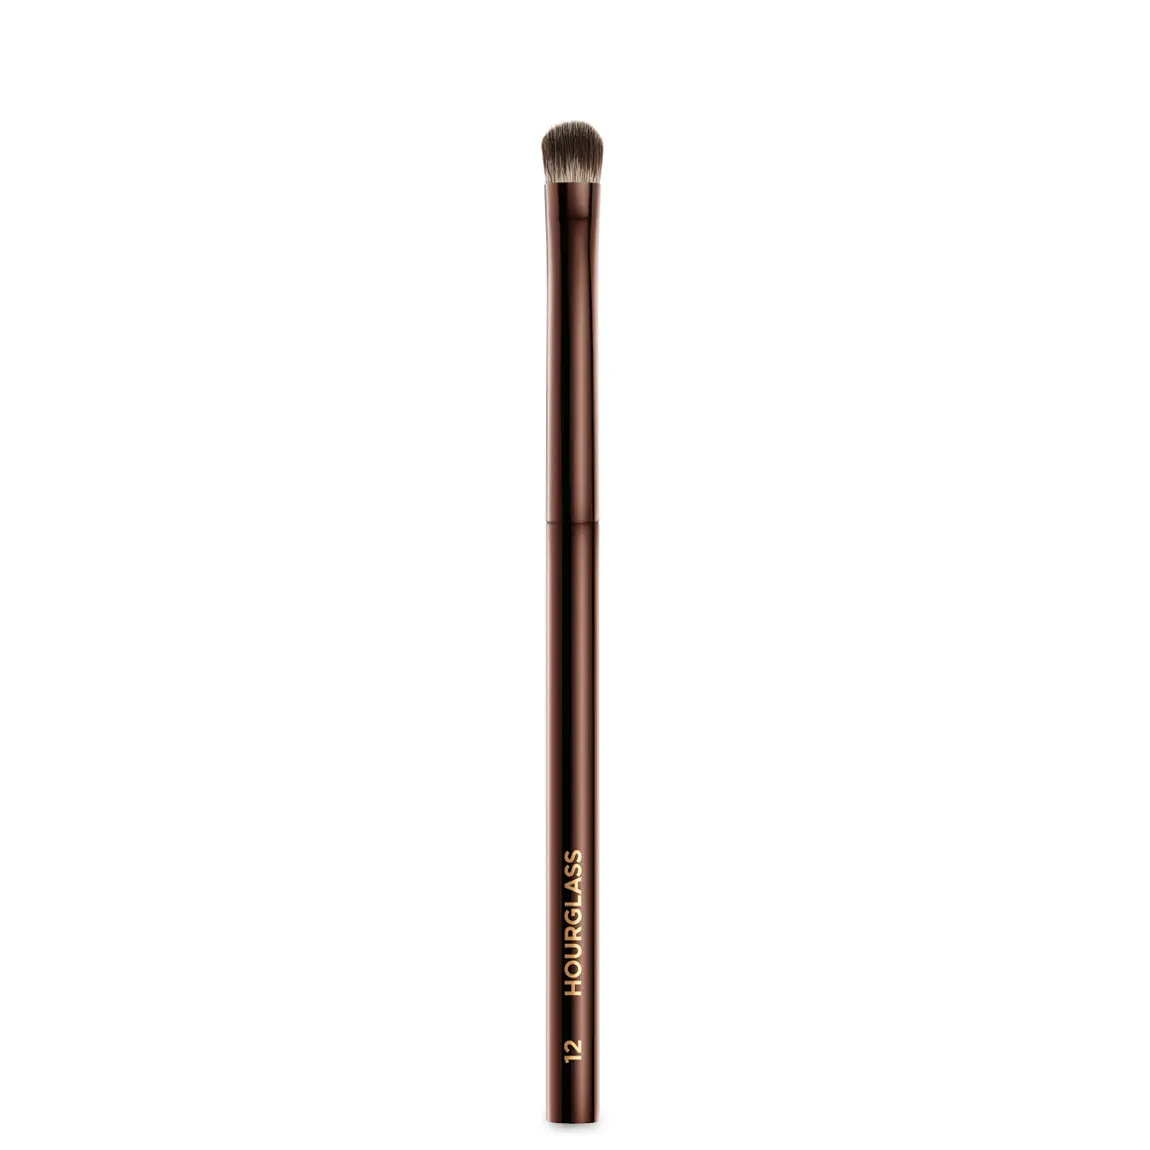 

Hourglass Nº 12 Beveled Shadow Brush - Makeup Brushes Small Eye Shadow Smudging Blending Highlighting Beauty Cosmetics Tools